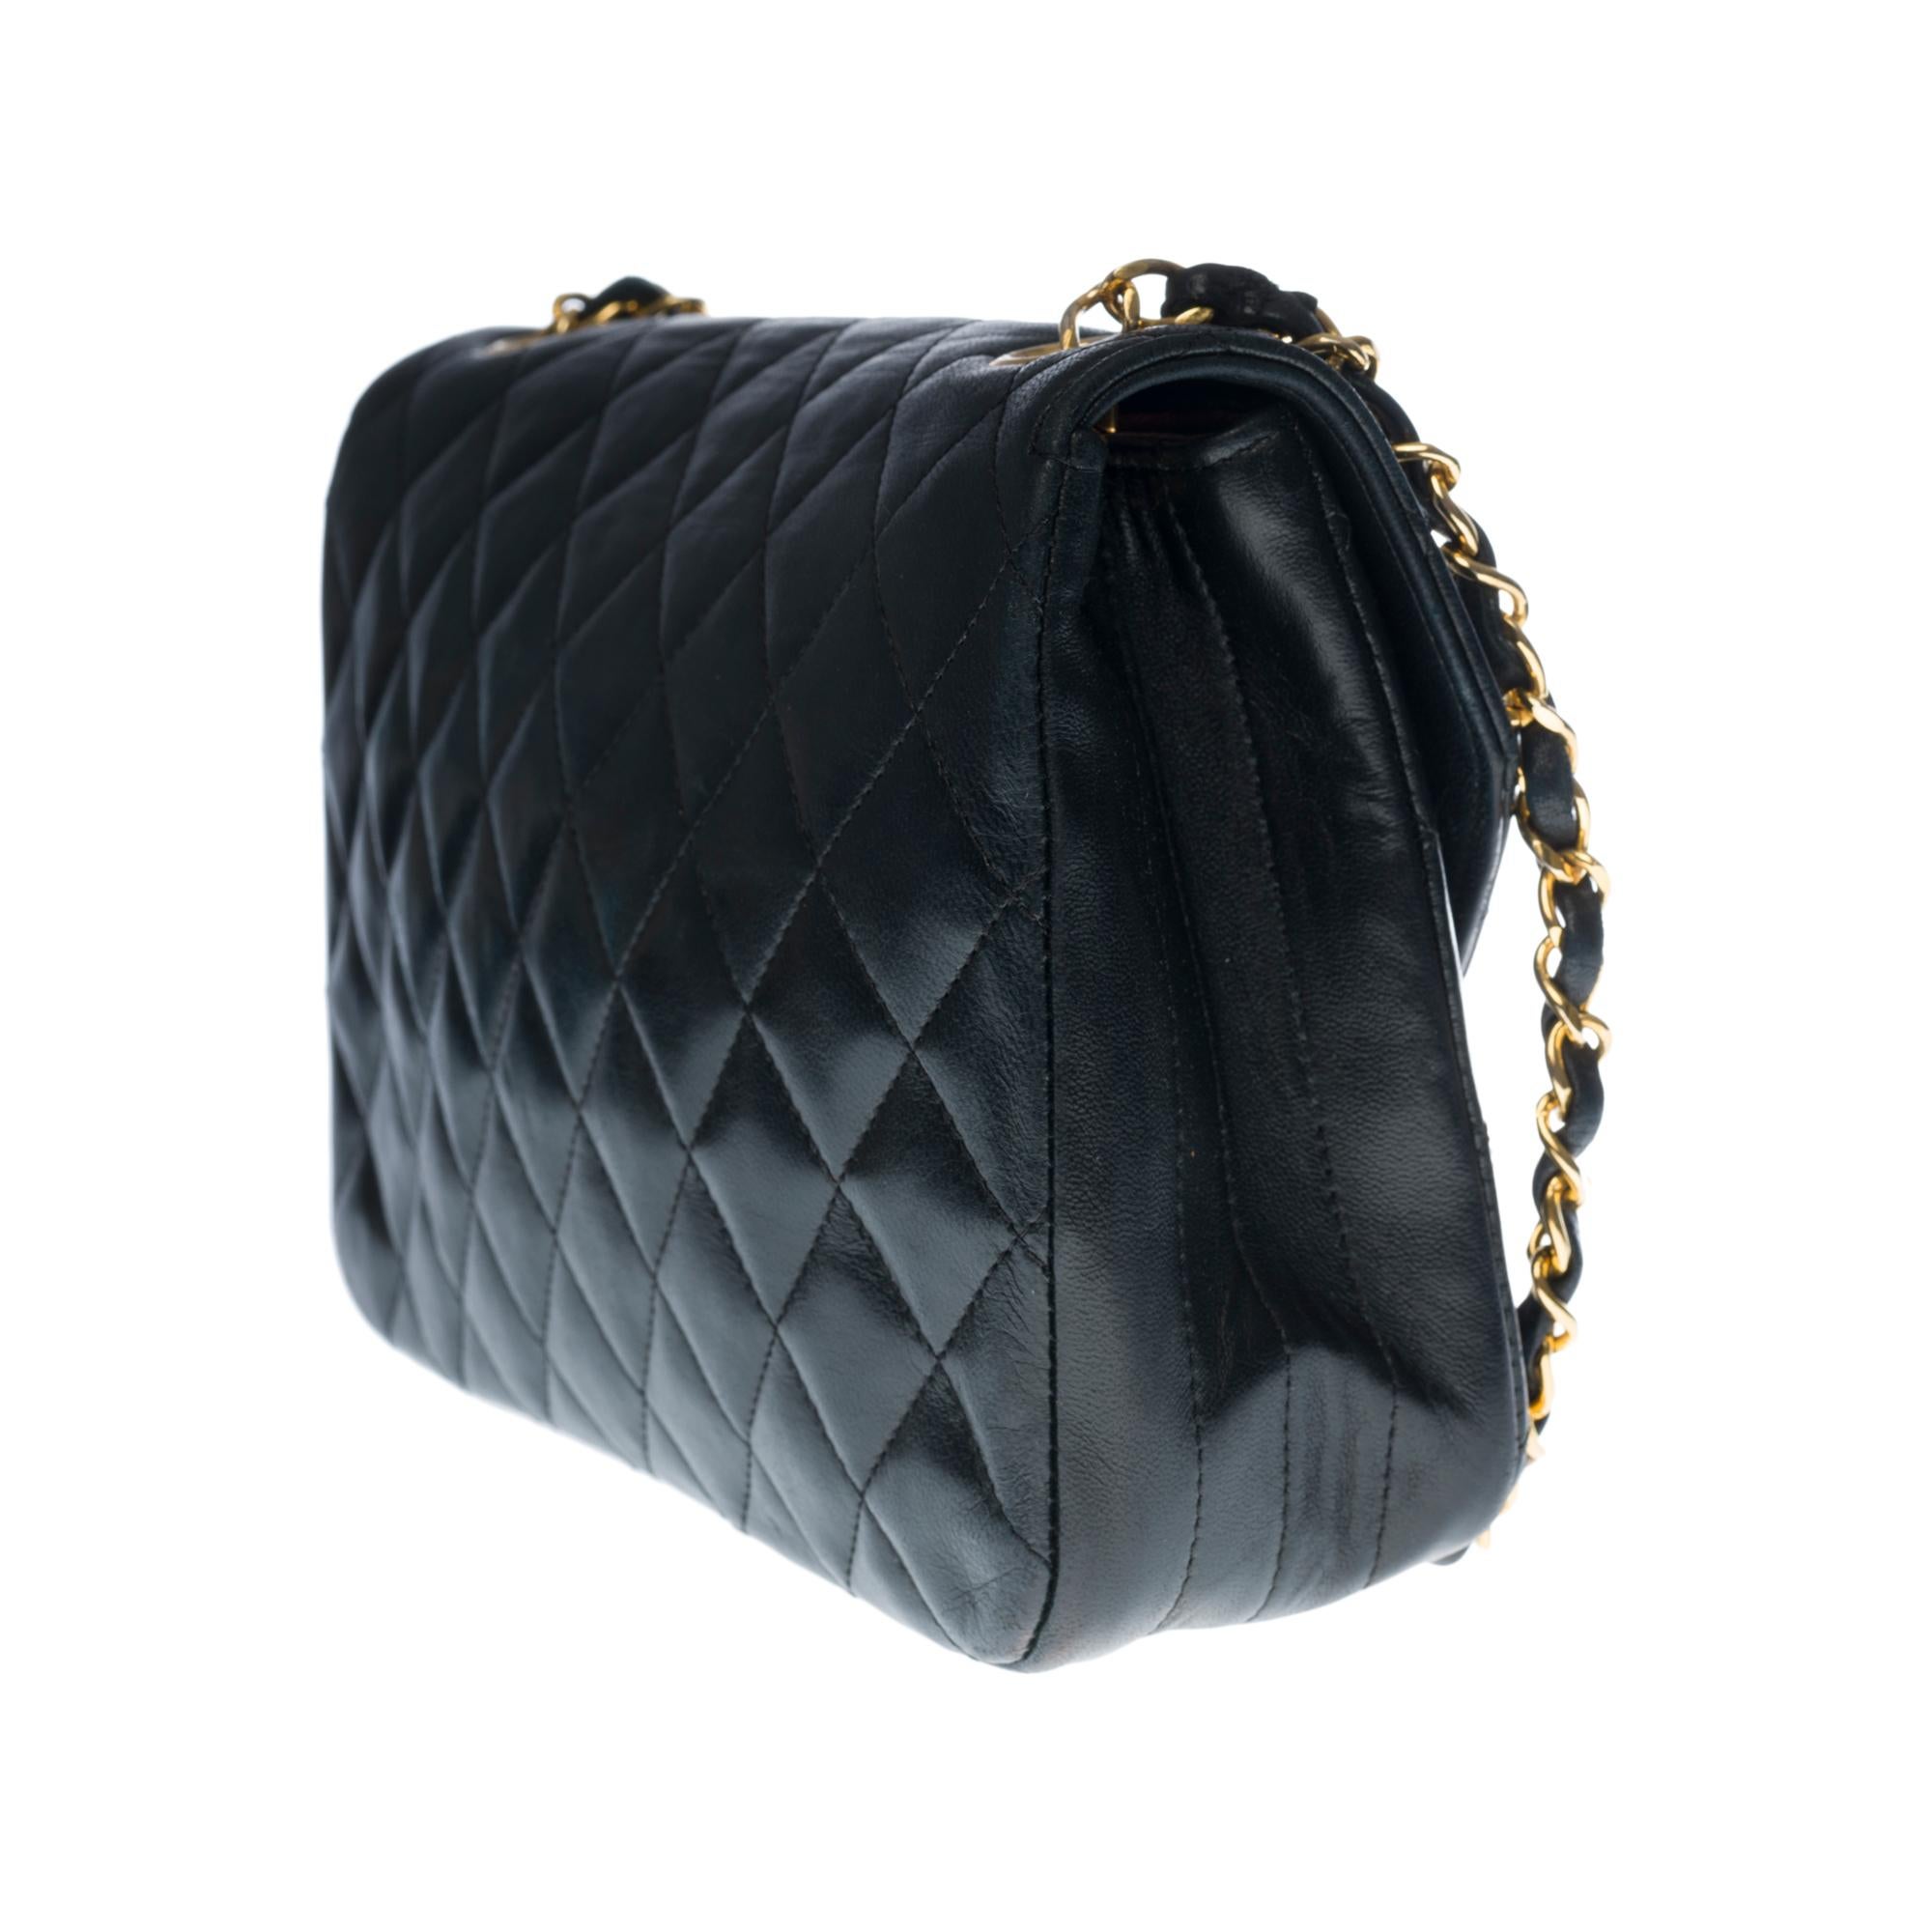 Women's Chanel Classic Single Flap shoulder bag in Black quilted lambskin, GHW